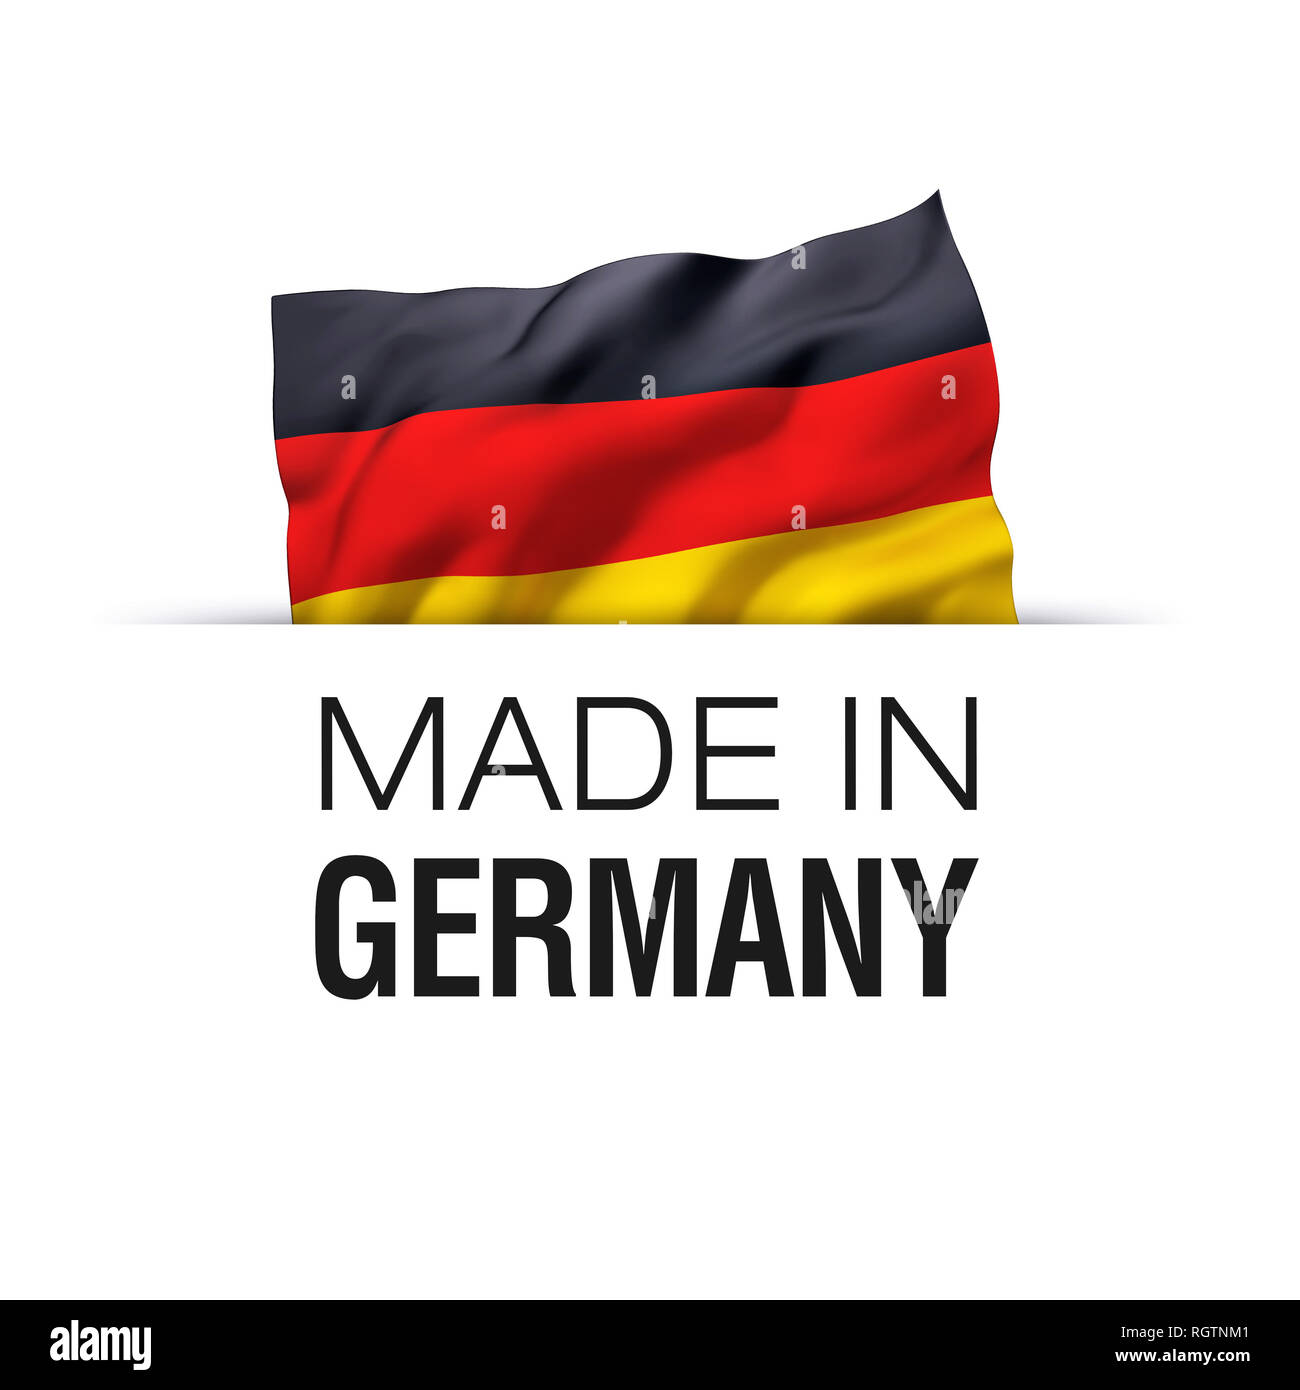 Made in Germany - Guarantee label with a waving German flag. Stock Photo